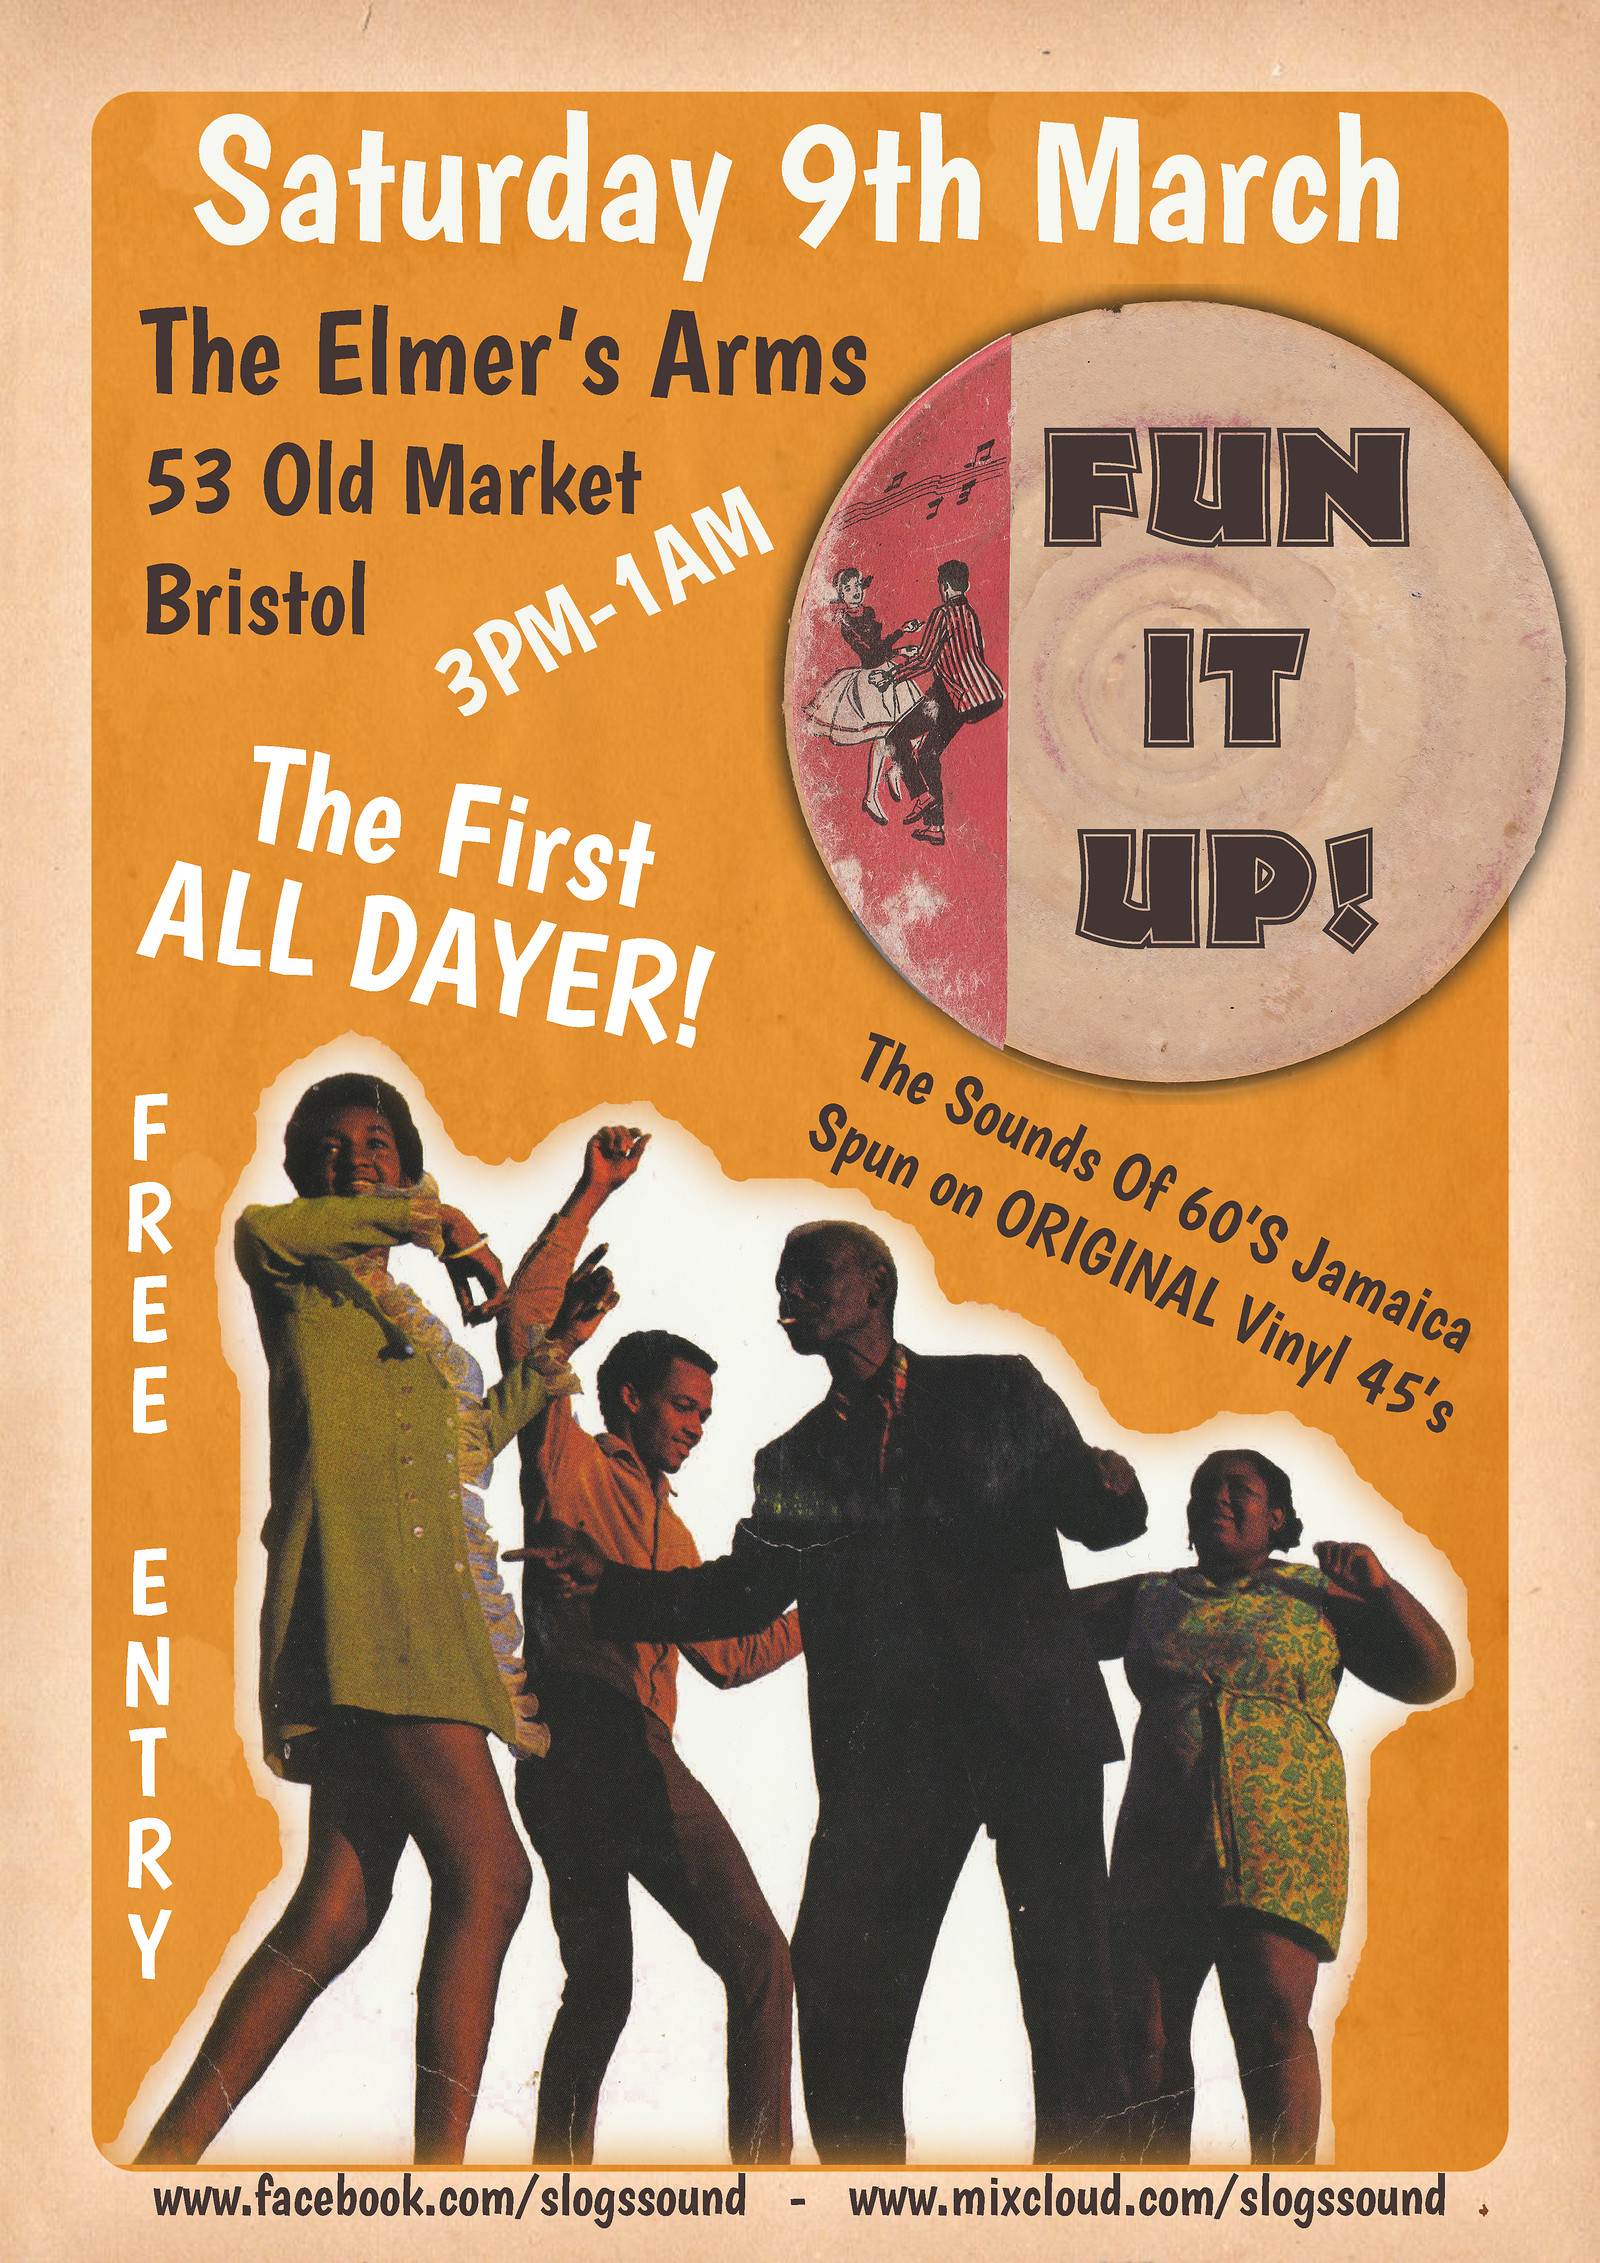 Fun It Up - Special All Dayer at The Elmers Arms